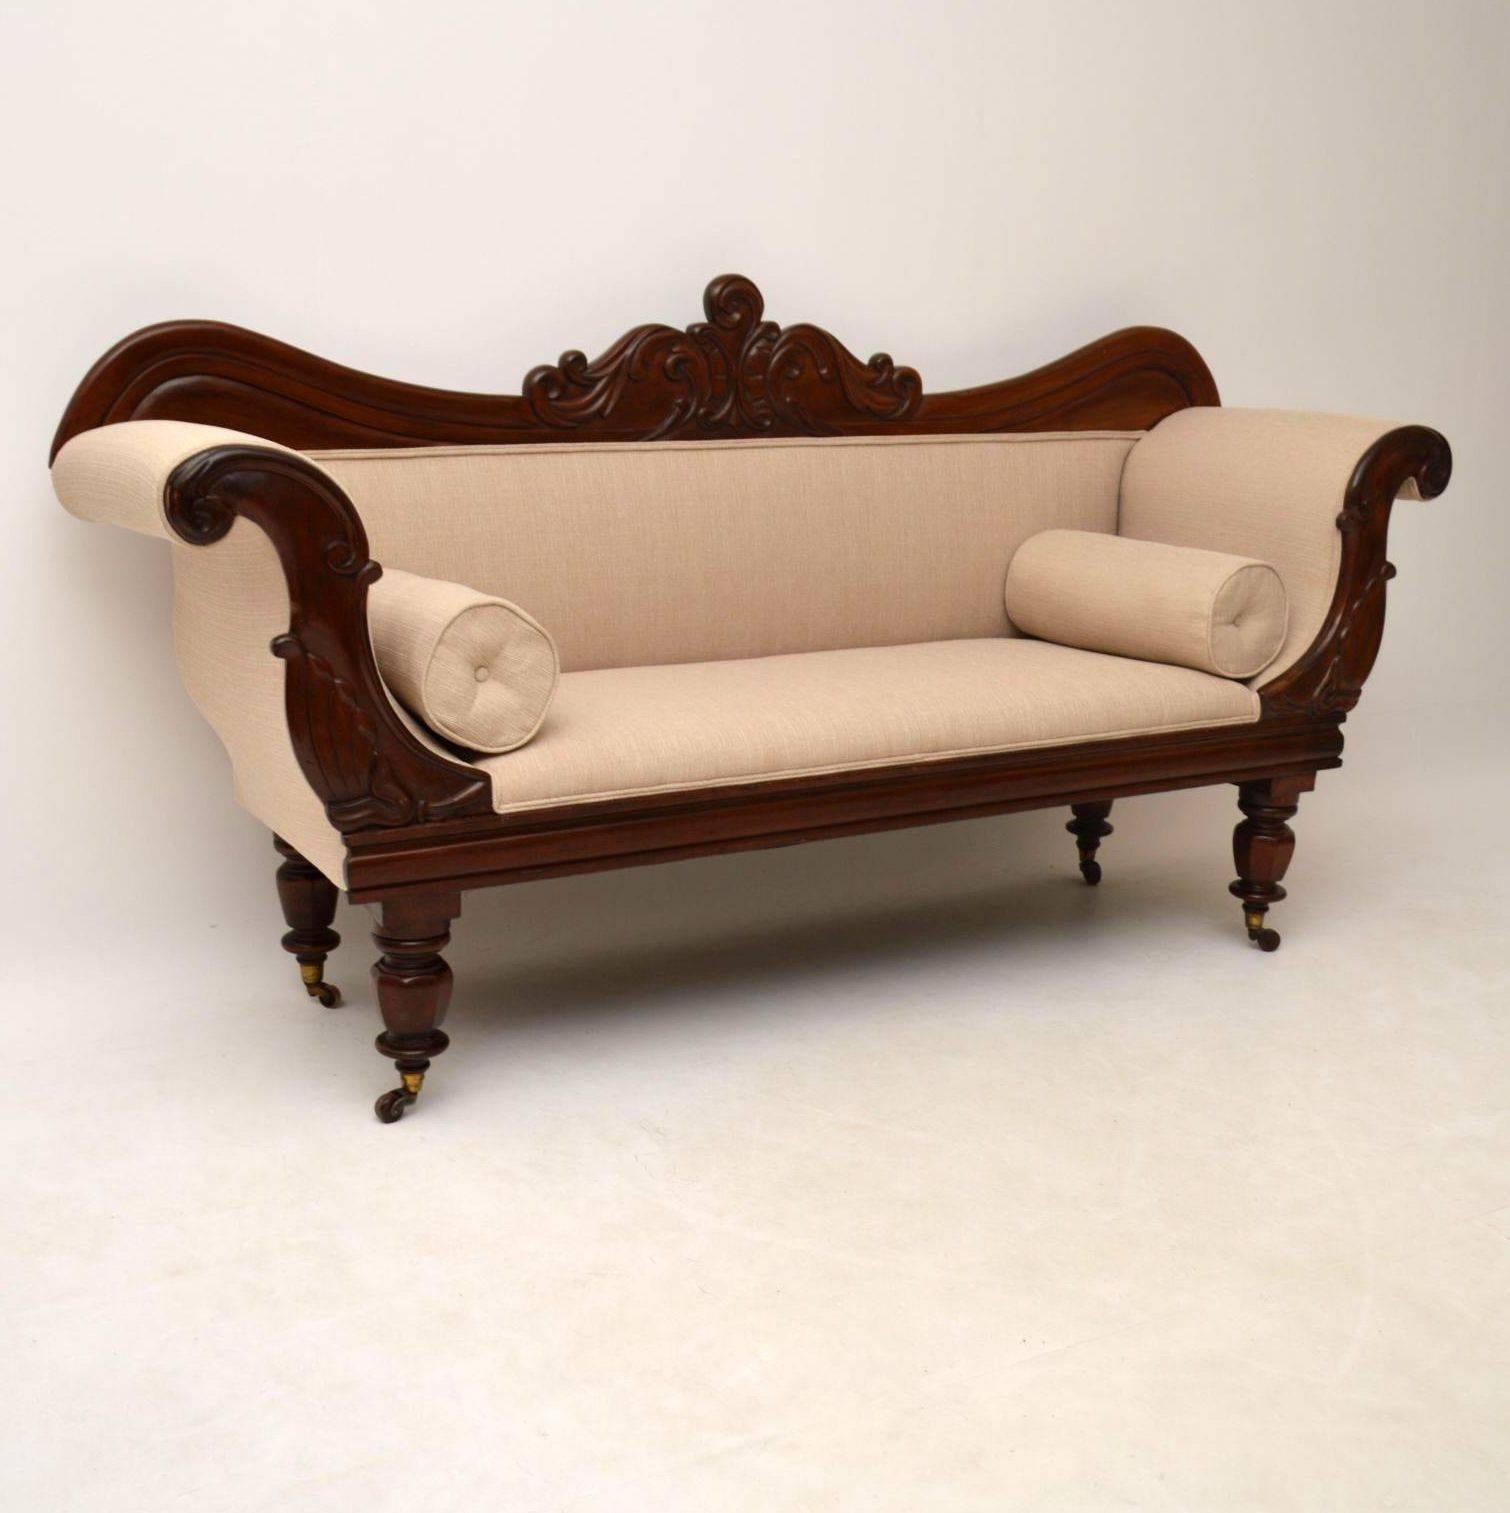 Very impressive antique carved mahogany upholstered sofa, dating from the William IV (1830-1840) period. It's in fabulous original condition, with all the carvings intact and even still has the original brass cupped porcelain casters. The frame is